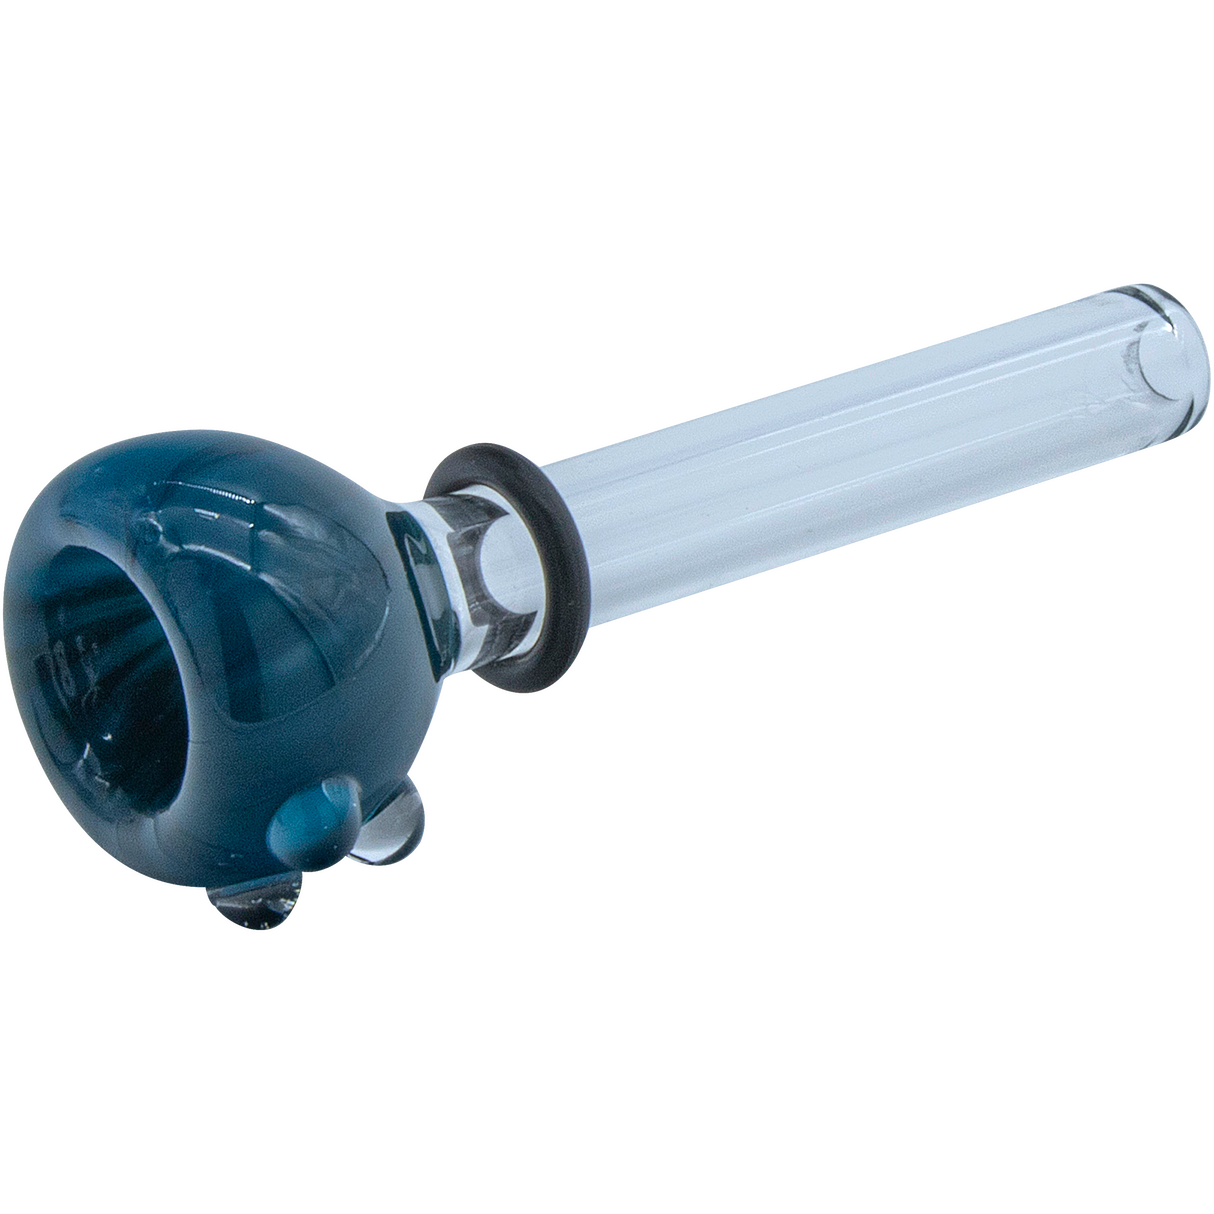 Cobalt Blue LA Pipes Candy Colored Pull-Stem Slide for Bongs, Borosilicate Glass, Side View